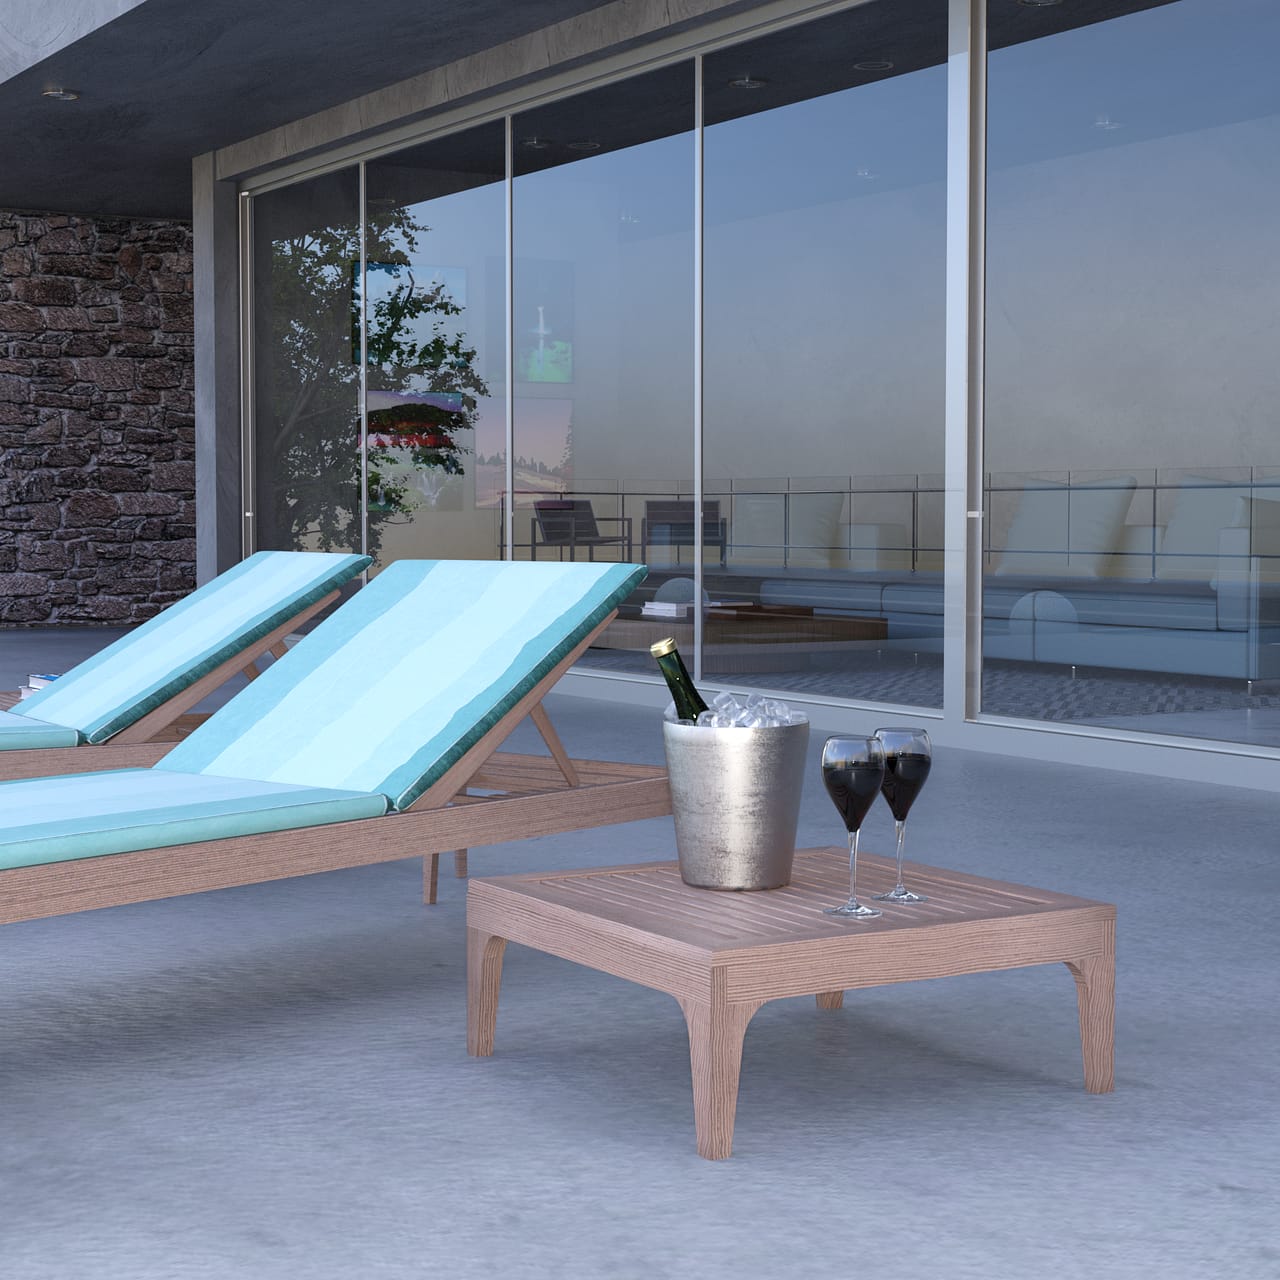 3d model of a Deck chair with a table and champagne bottle